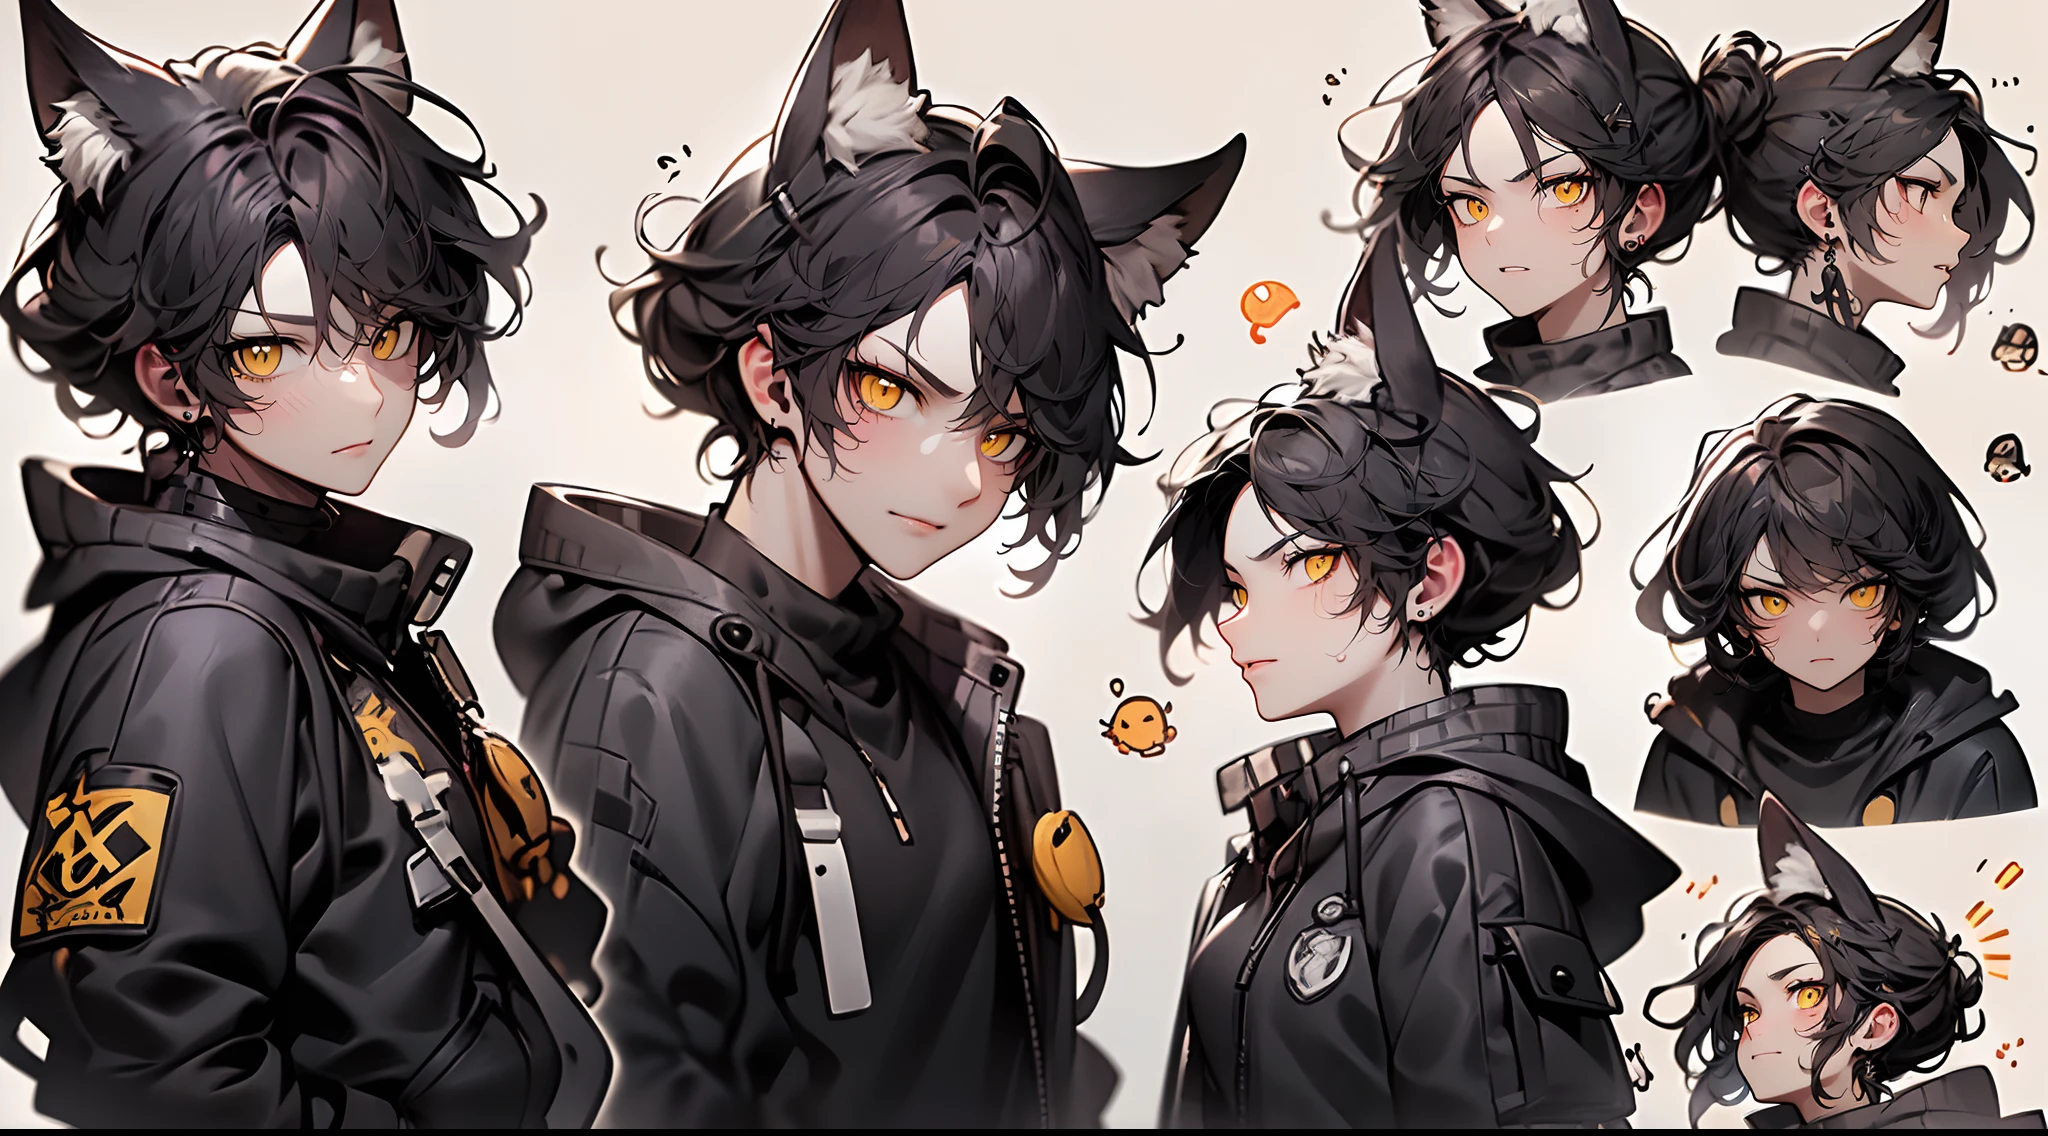 (4K works))、​masterpiece、(top-quality)、Korean Male、Adult male、((Adult 26 years old))、((Adult older brother))、((werewolf man))、((The Man with Wolf Ears))、((Face similar to Hyun Jin))、Cool Men、tall、((Glaring expression))、((Strong eyes))、((Black cool werewolf fashion))、((Long sleeve long trouser style))、((smaller face))、Slim body、((hooligan))、((Black short-haired))、((Yellow eyes))、((Shot alone))、((Solo Photography))、Professional Photos、((Emoticon pack))、((emoji pack))、((Werewolf costume))、((10 emojis))、((10 poses and facial expression emojis))